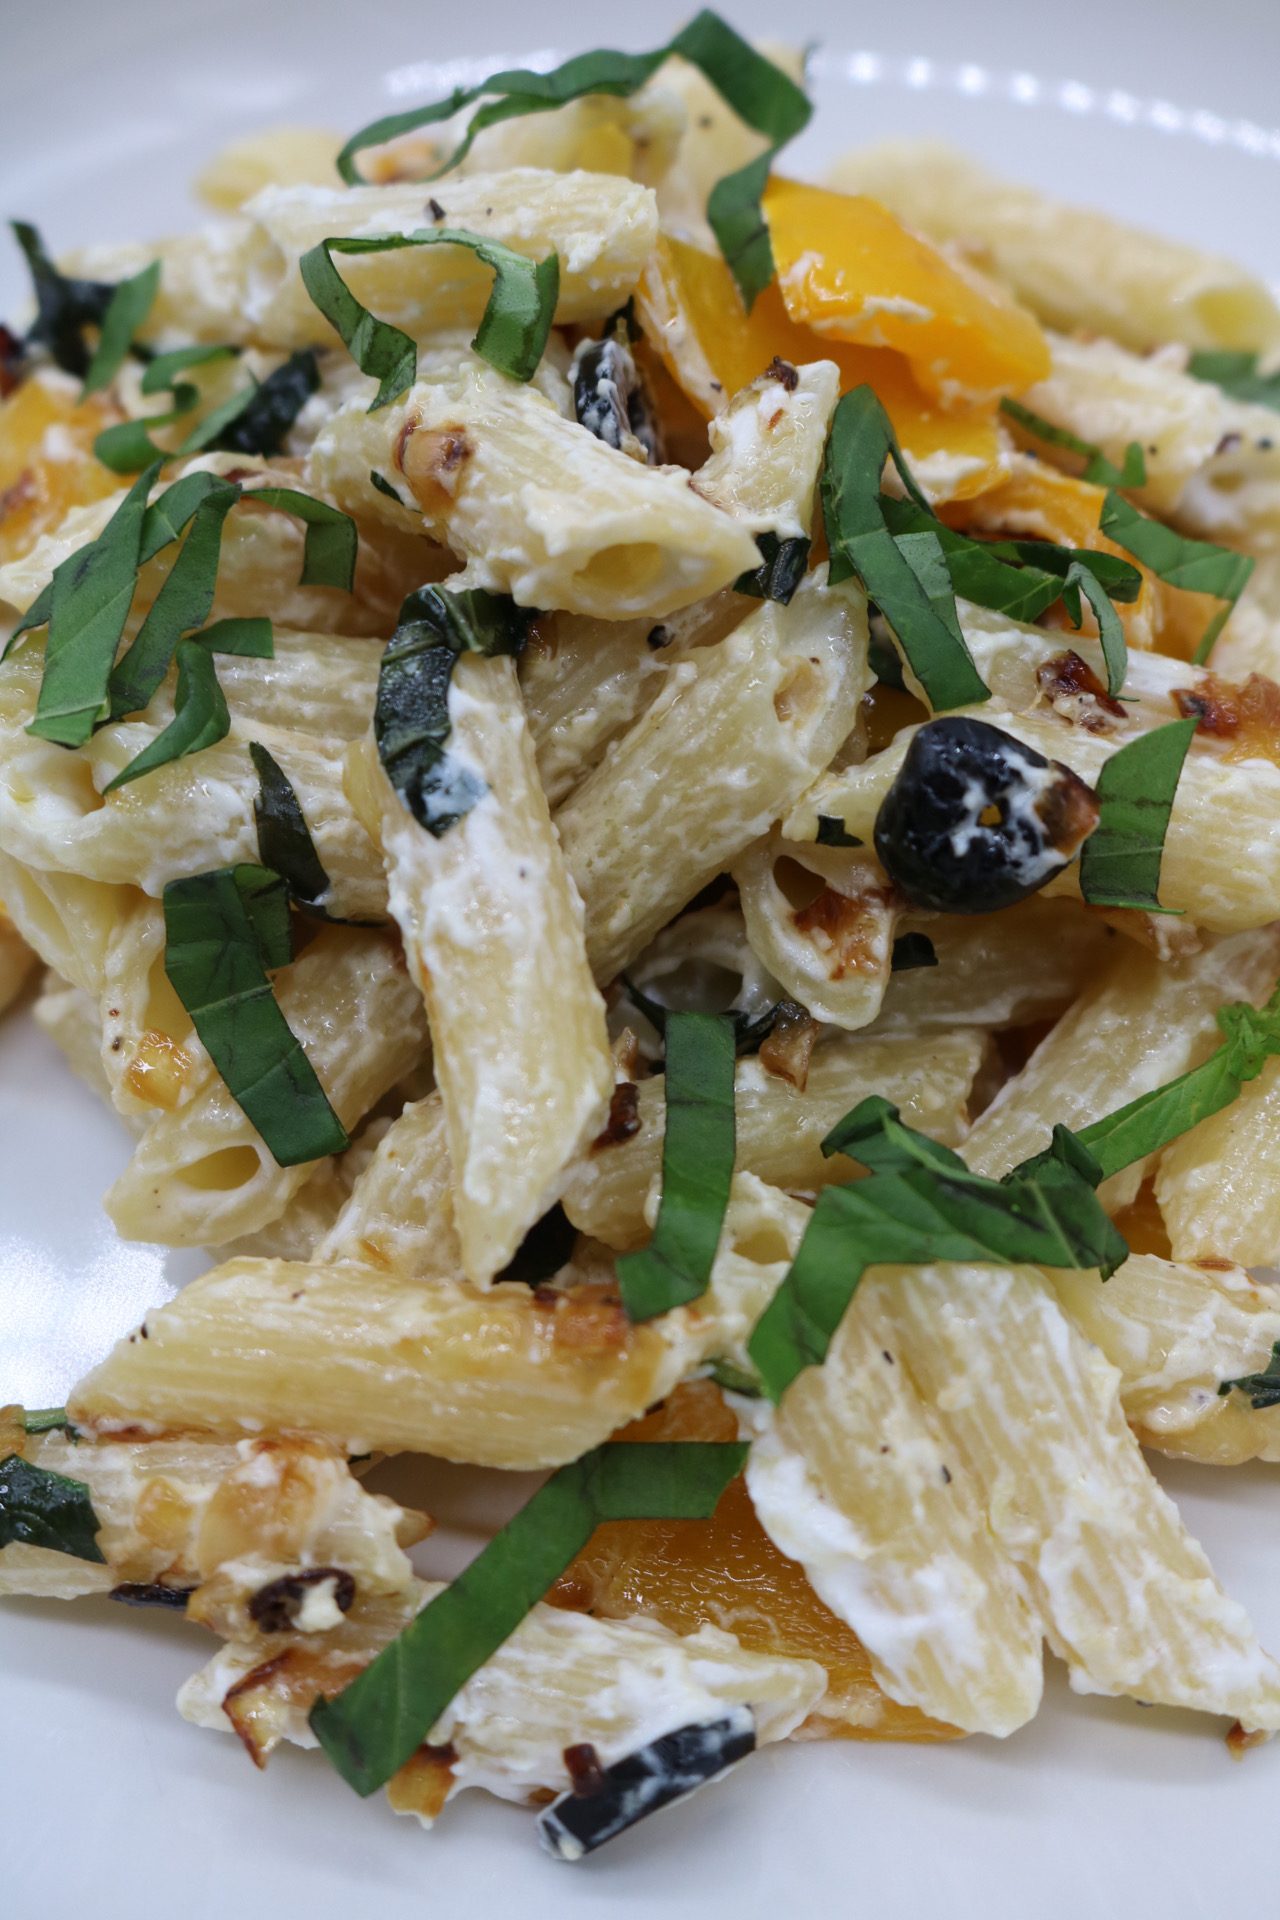 Penne with Peppers and Goat's Cheese